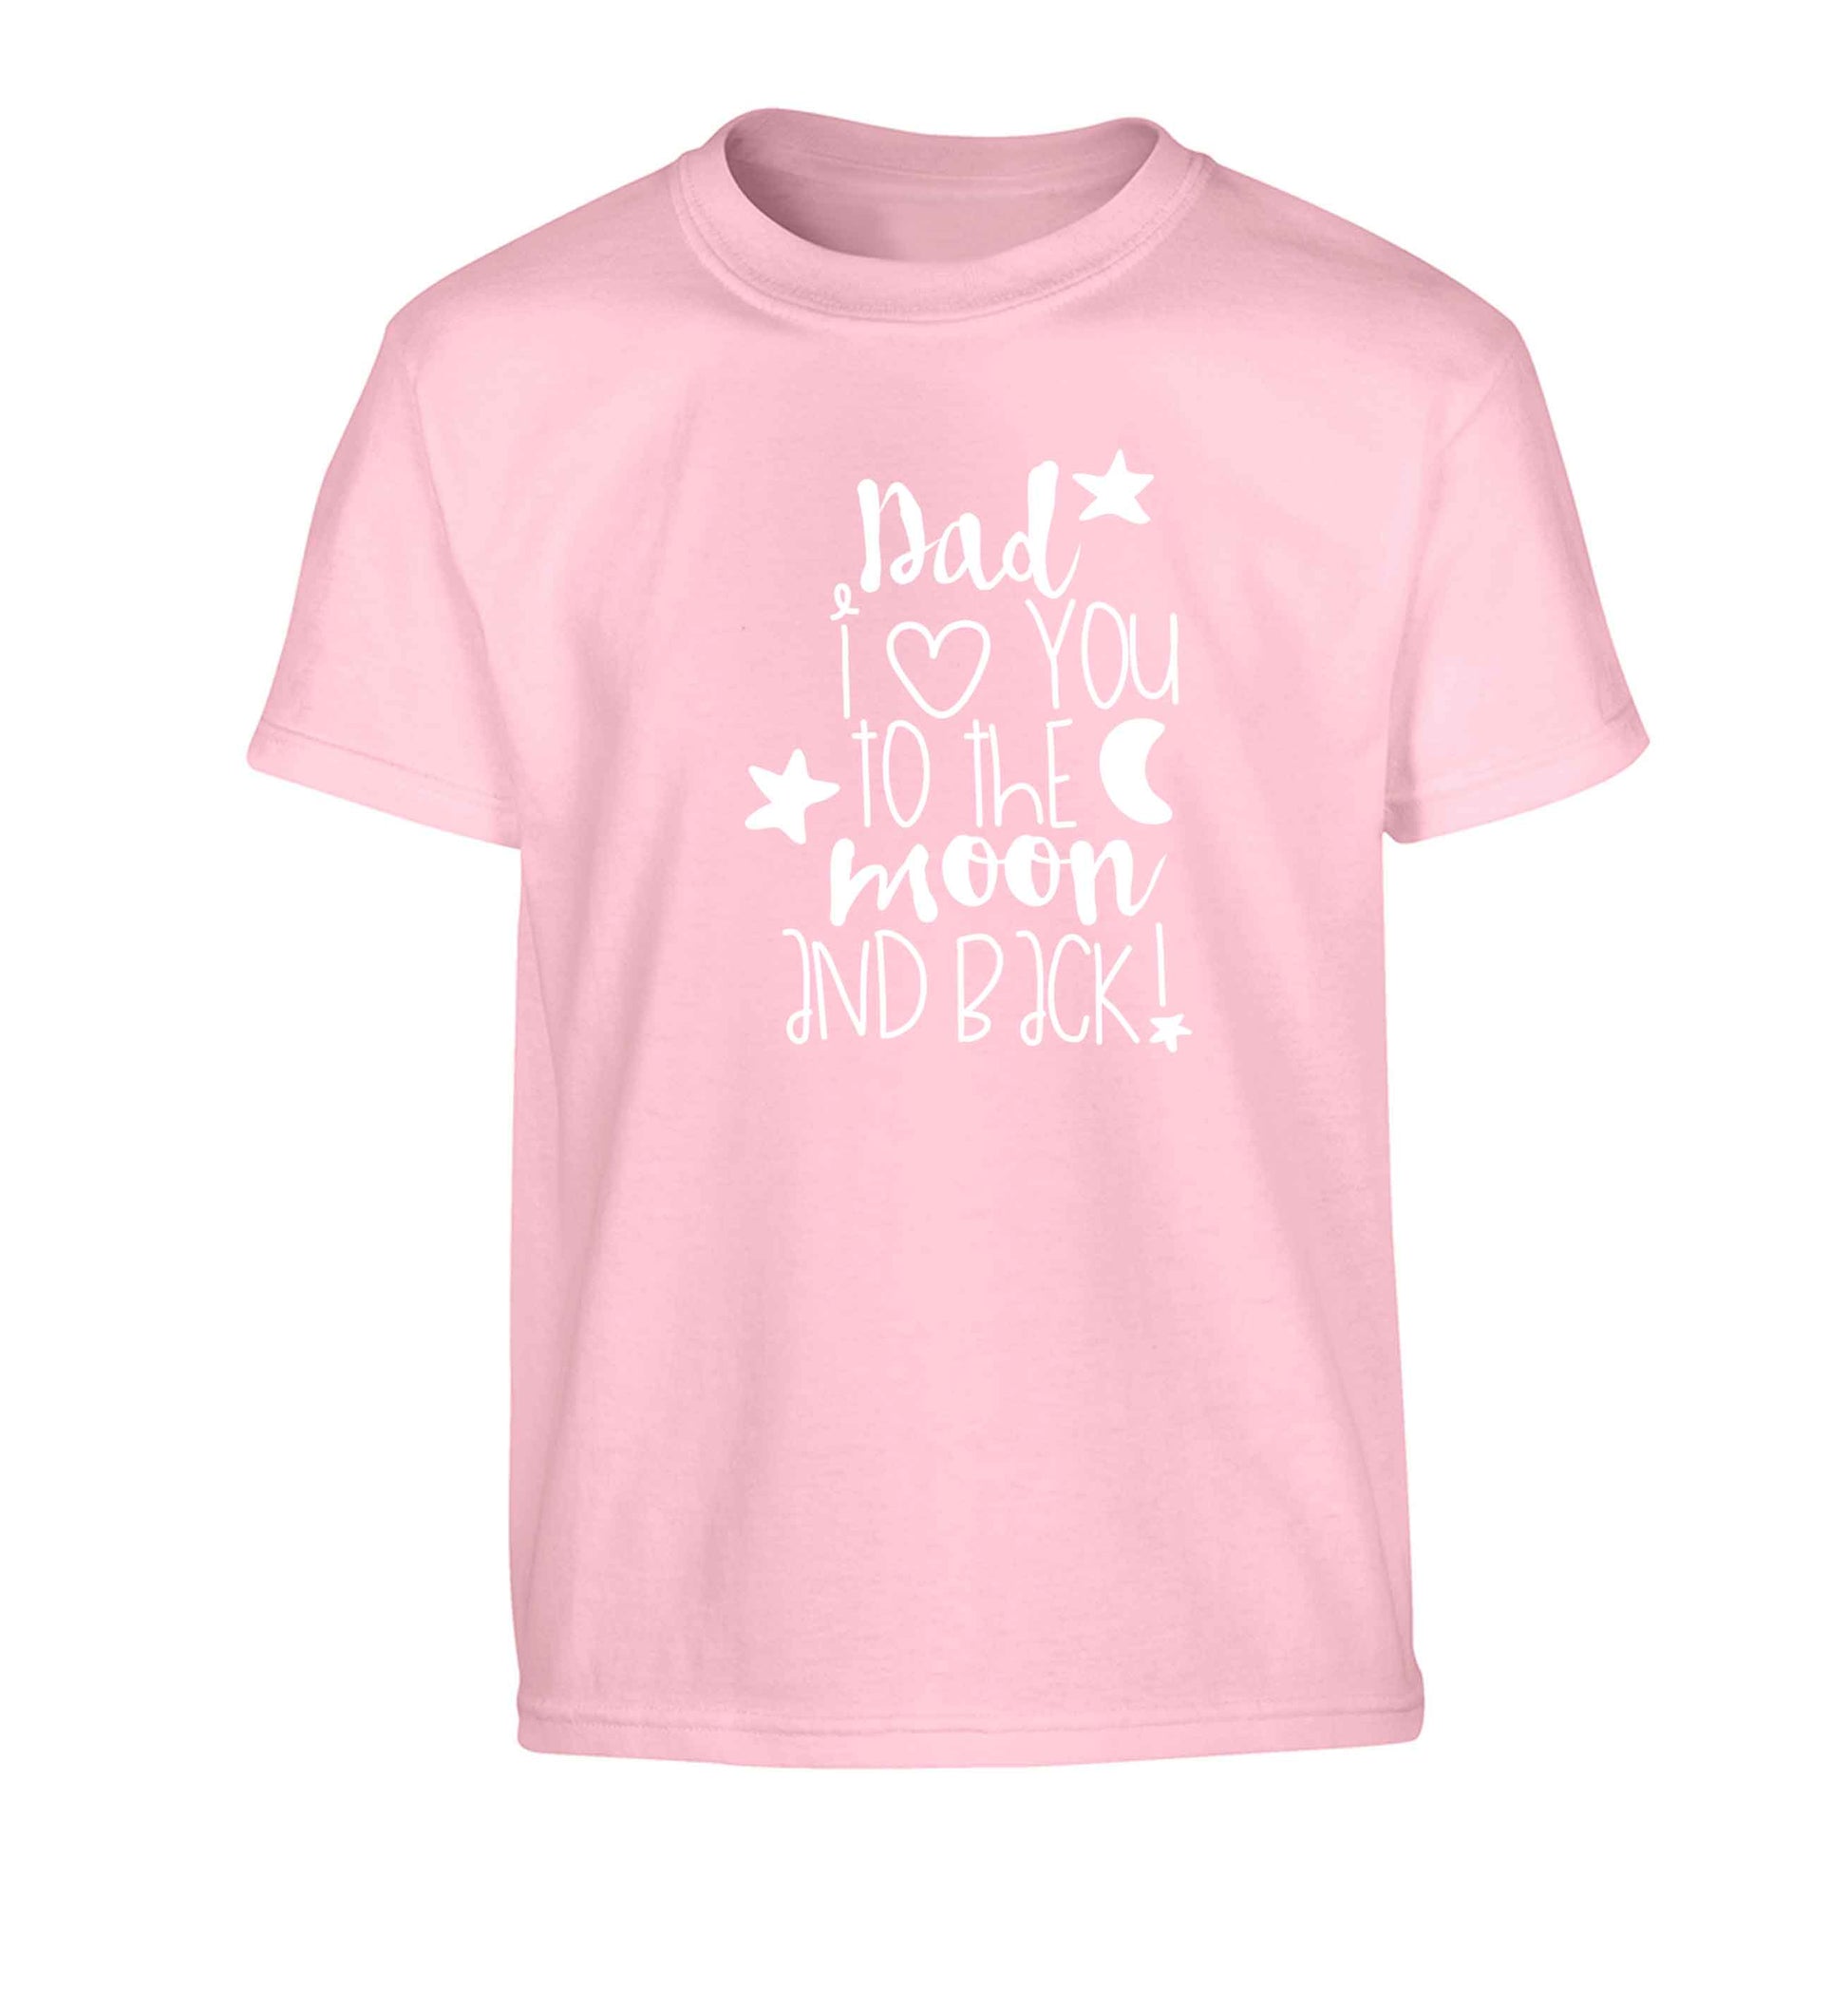 Dad I love you to the moon and back Children's light pink Tshirt 12-13 Years